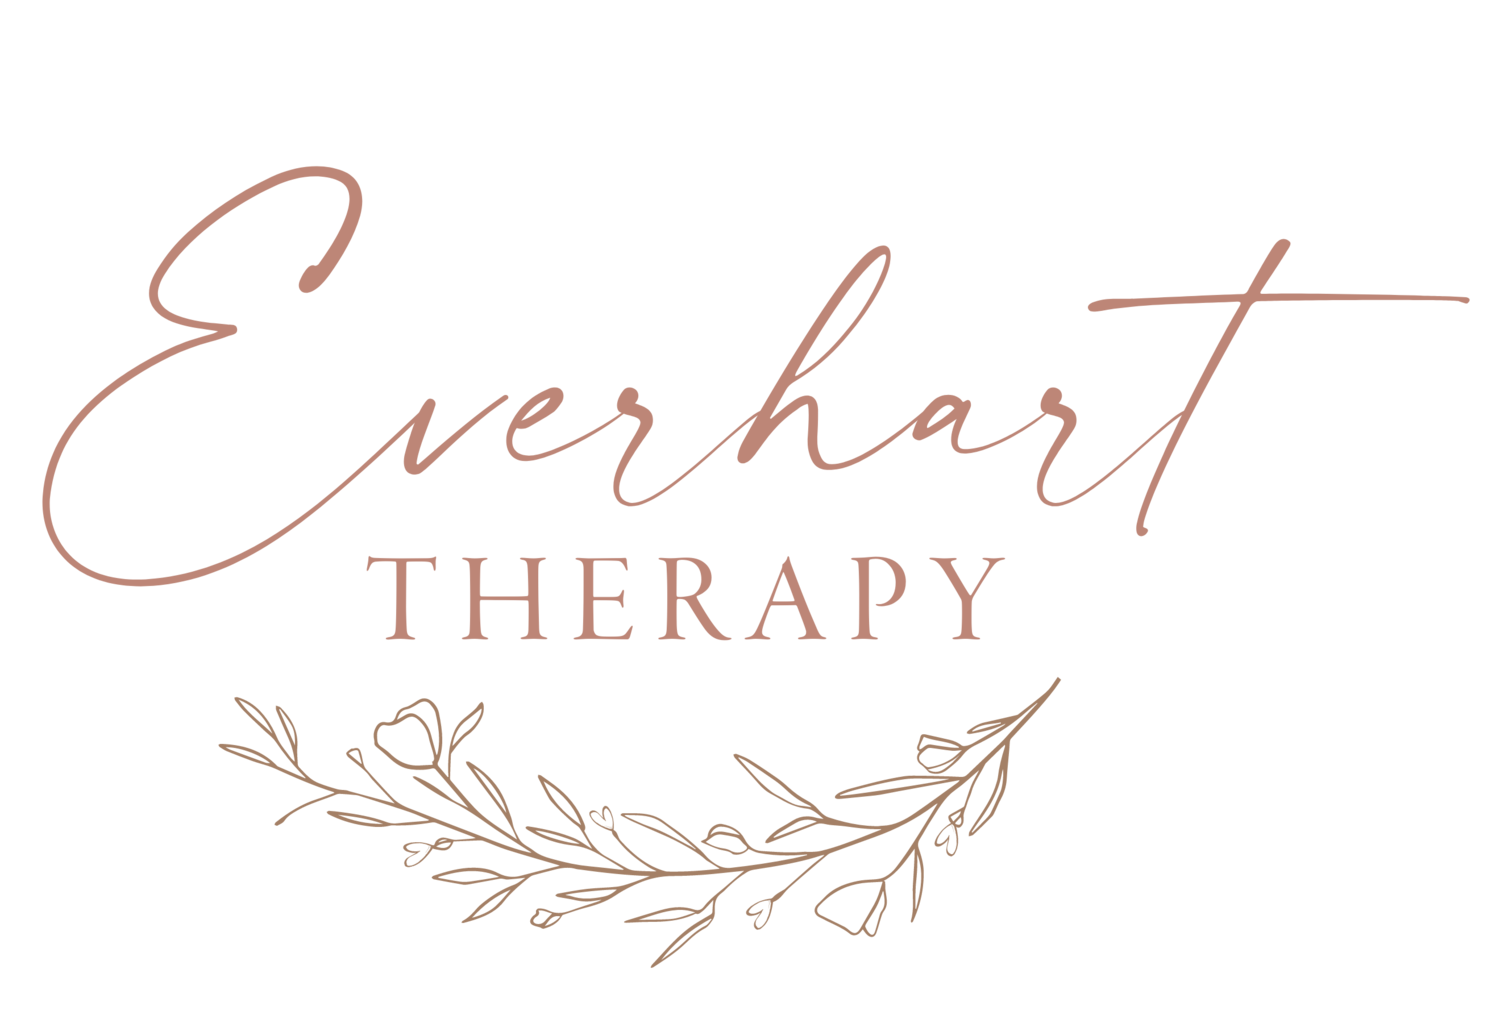 Everhart Therapy